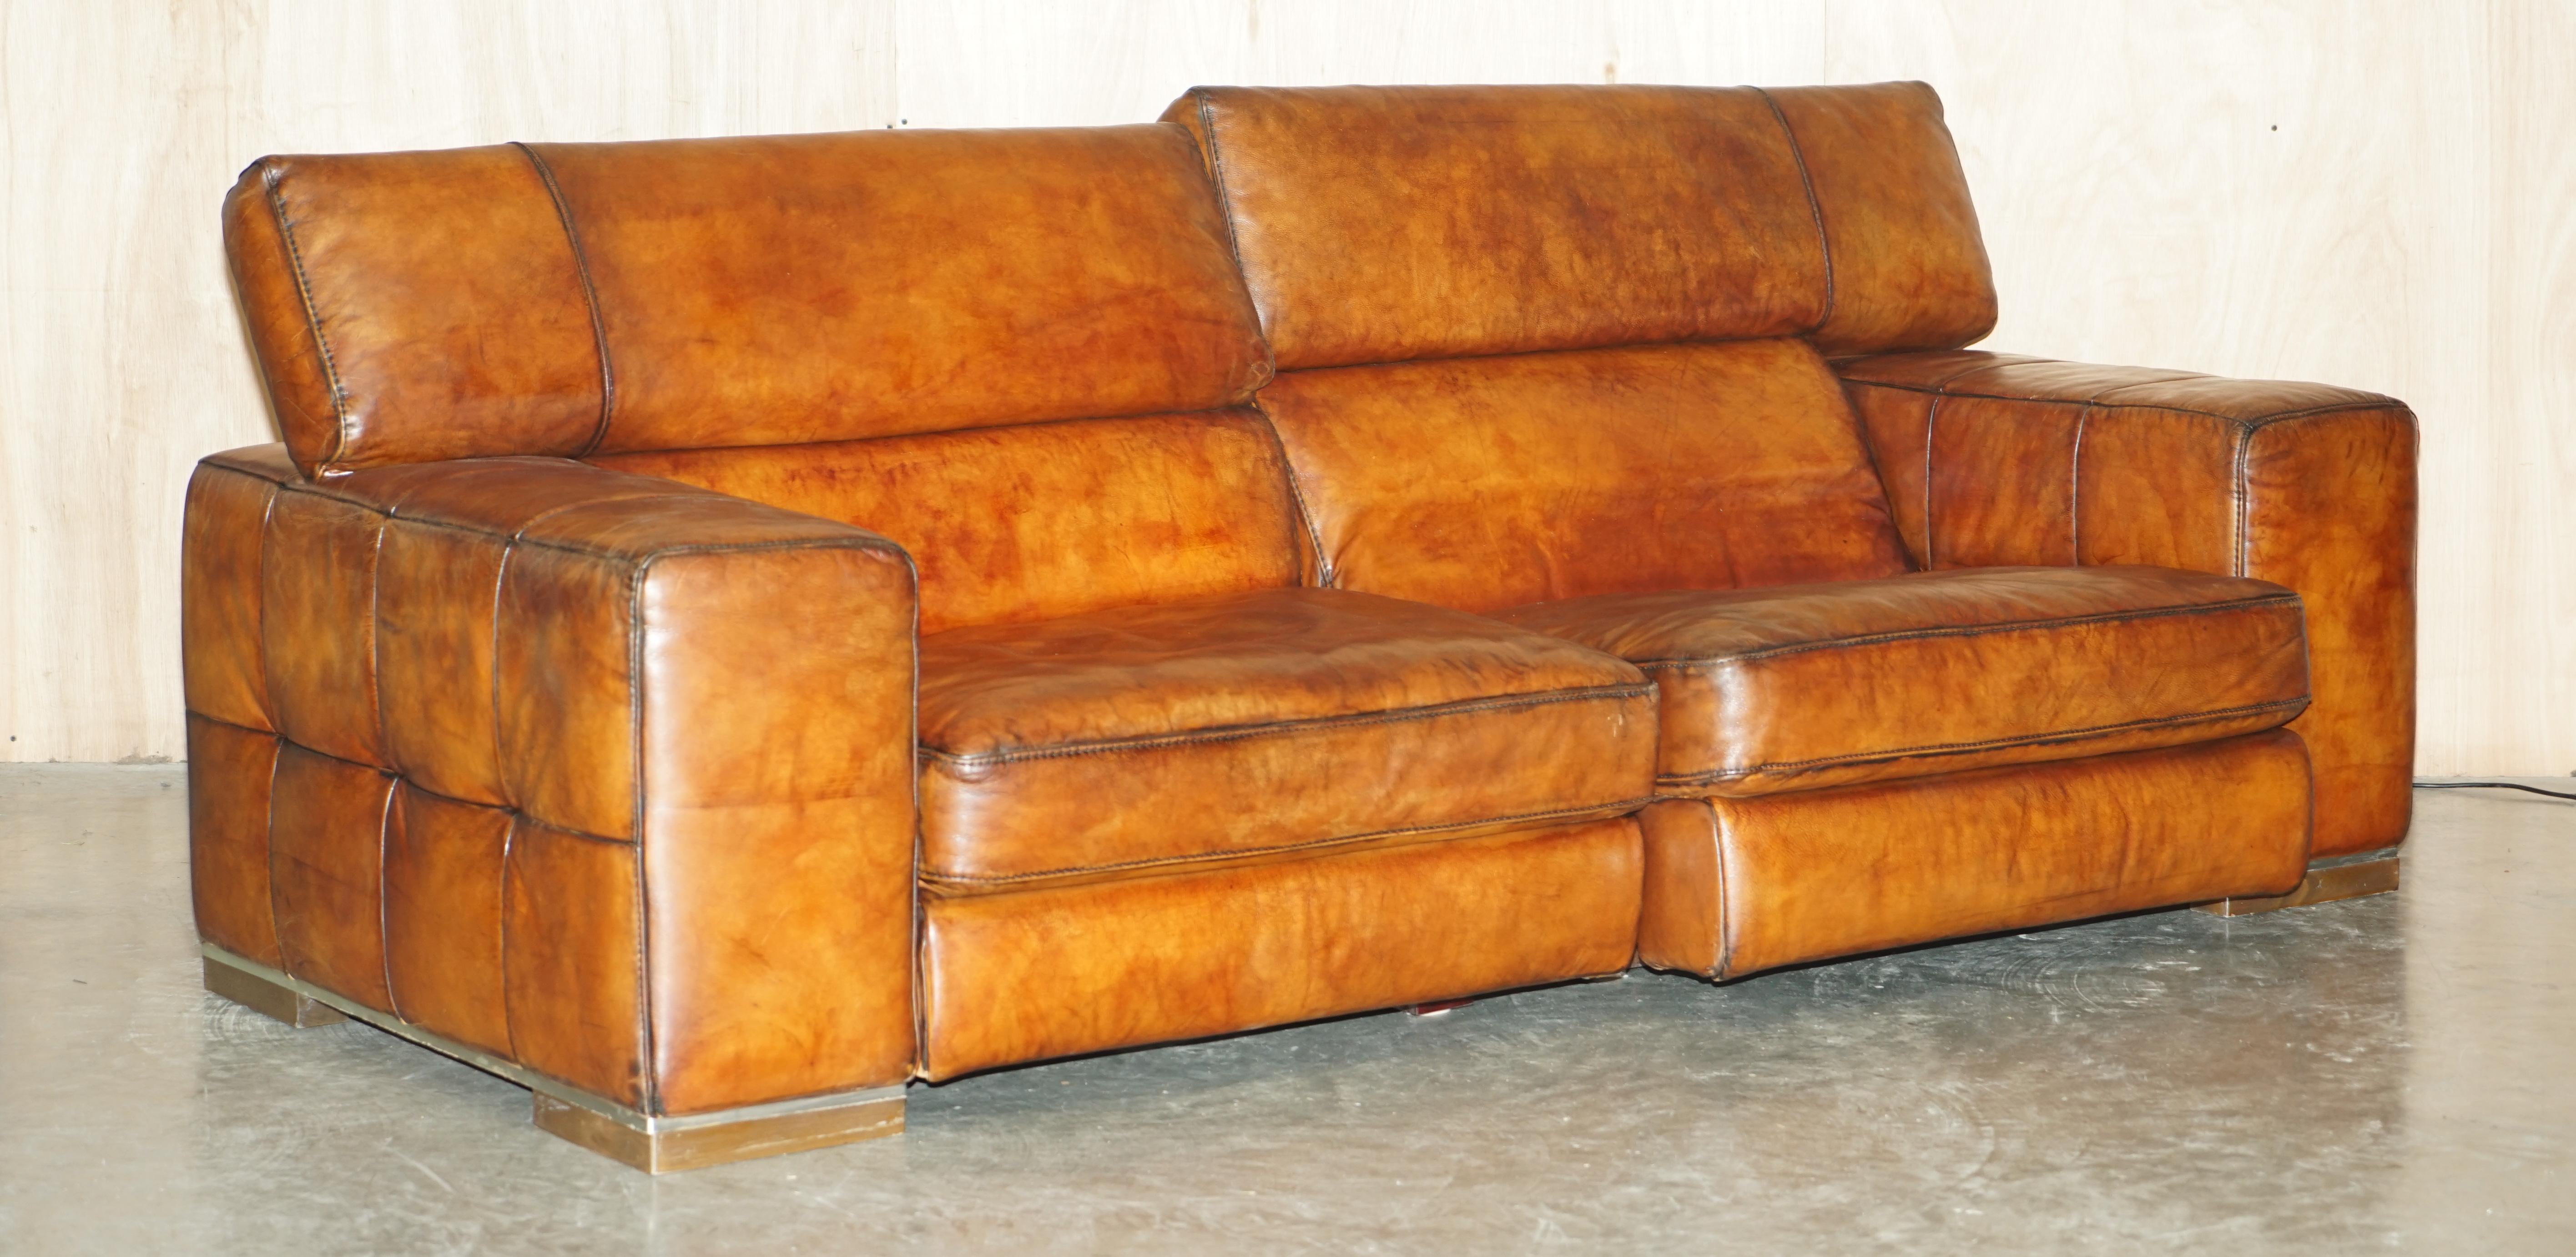 Natuzzi Roma Cigar Brown Leather Sofa Electric Raising Headrest Part of a Suite For Sale 7